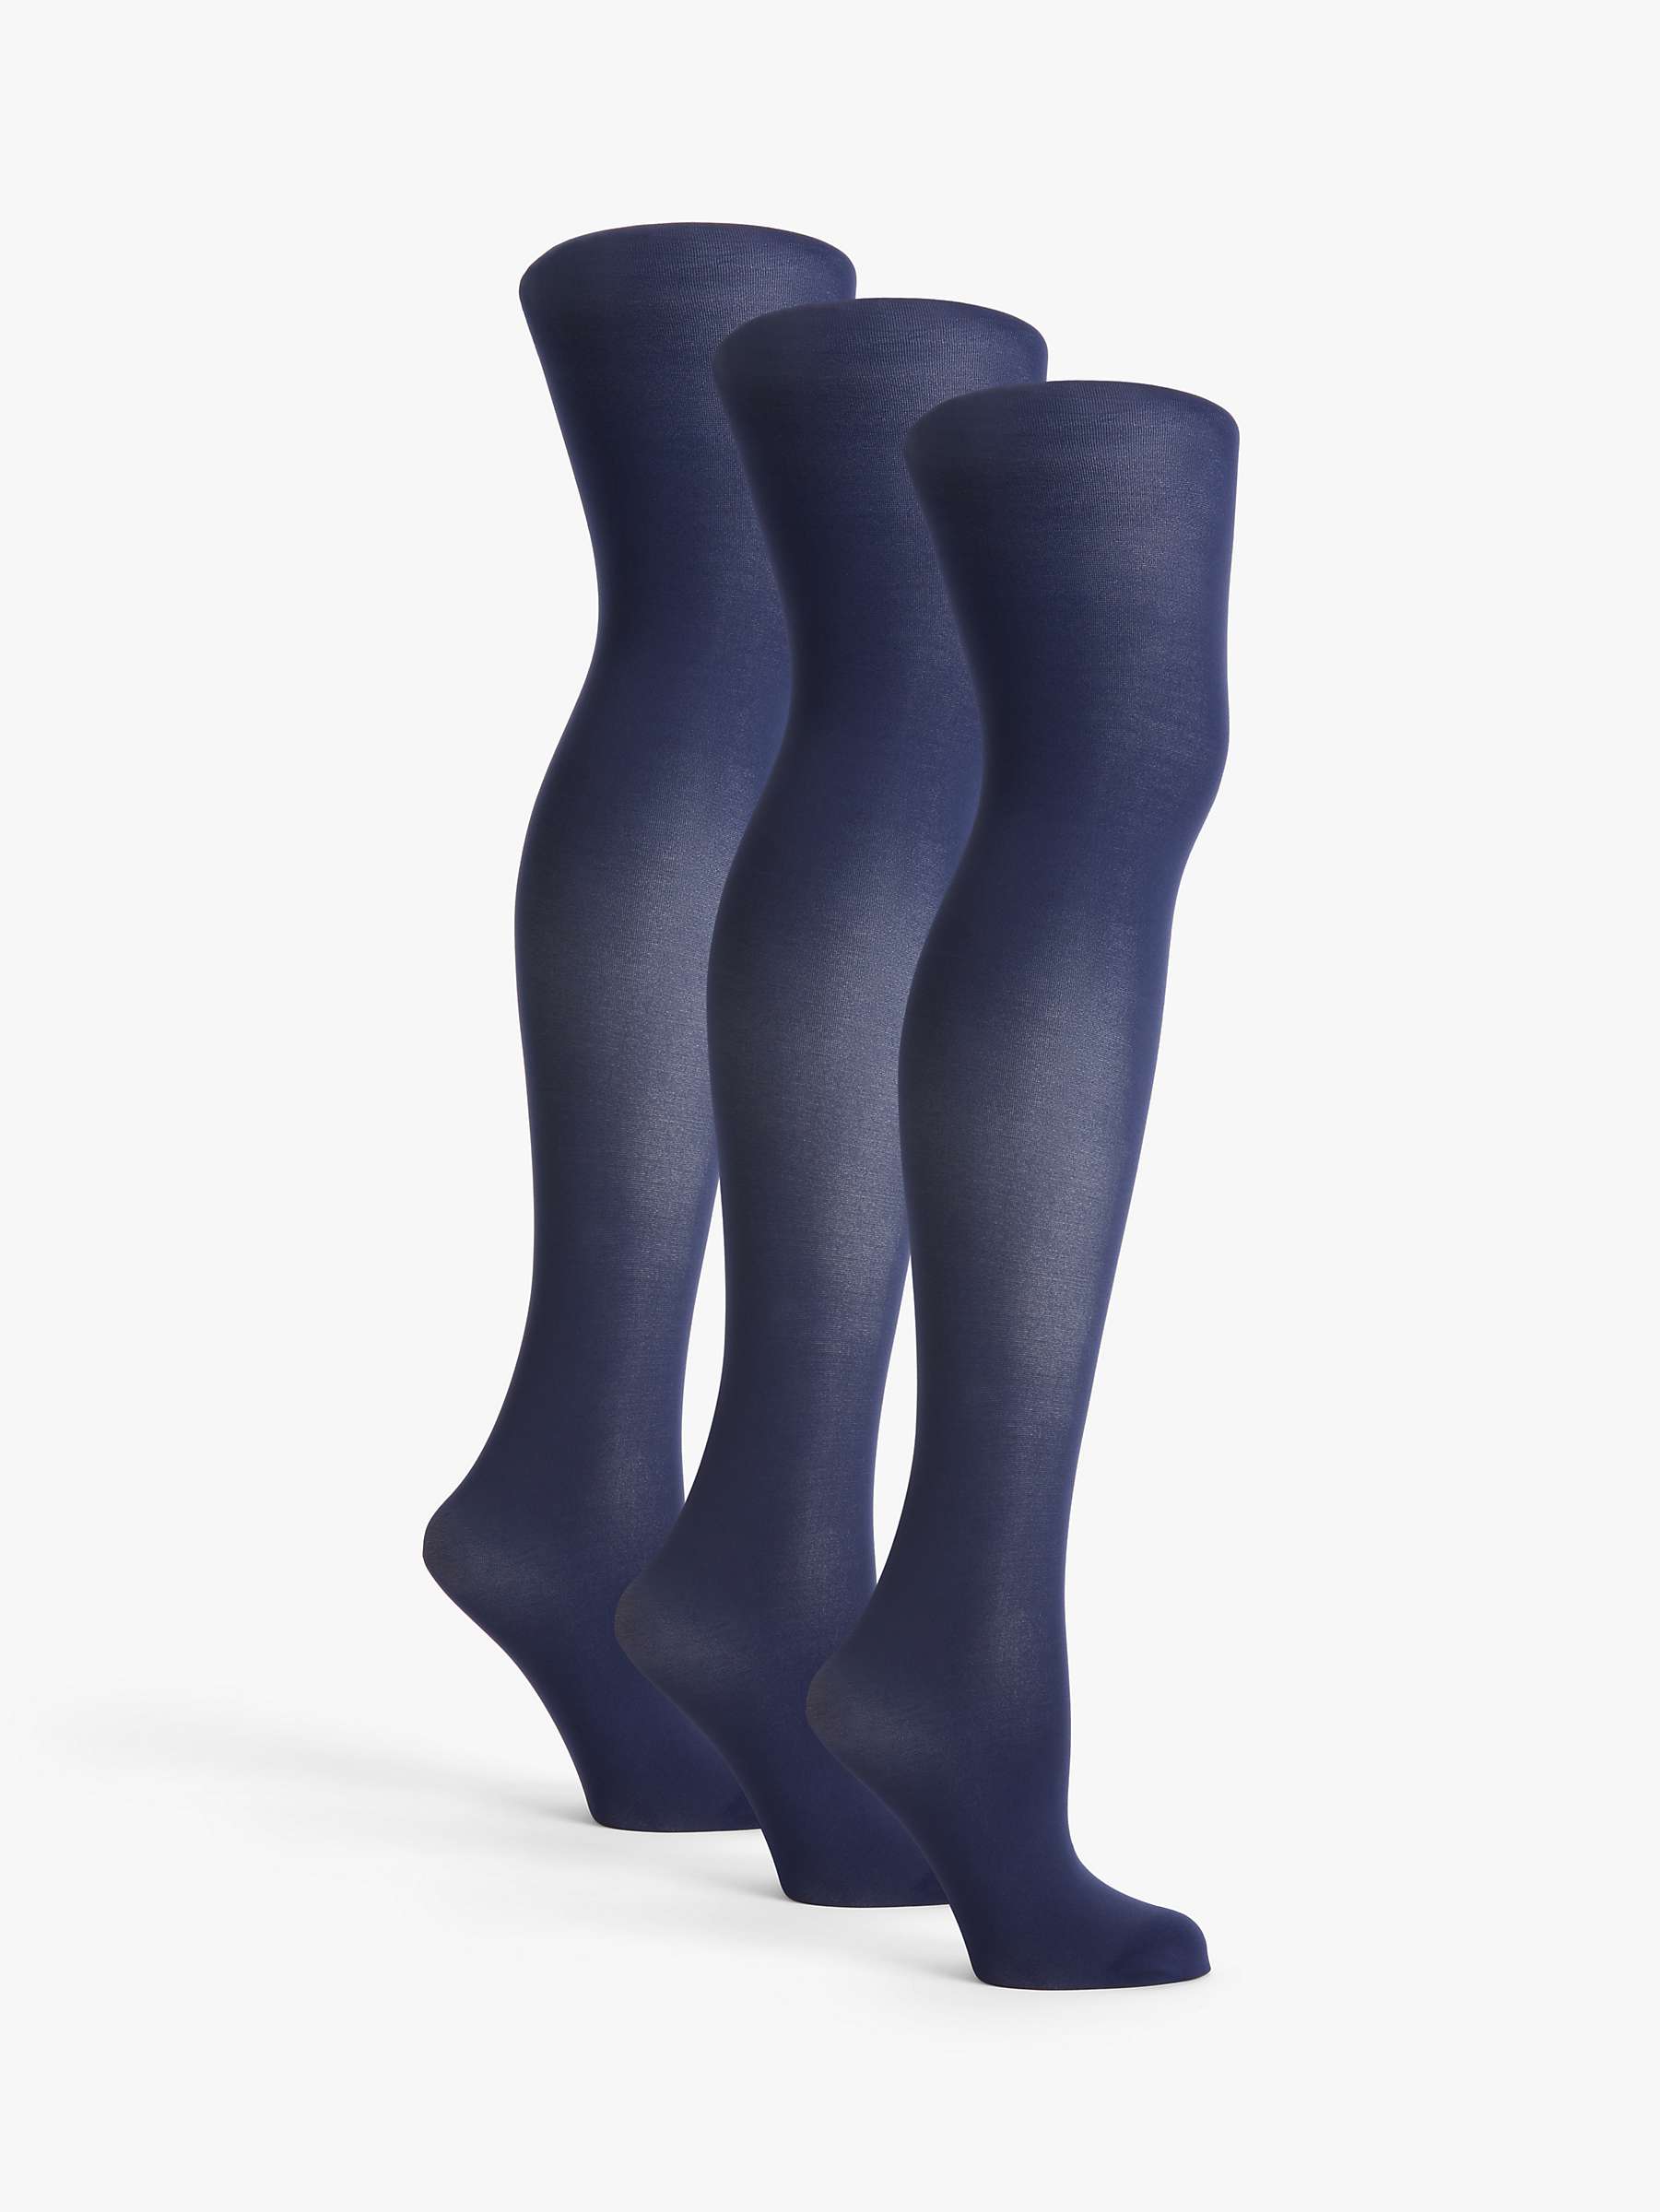 Buy John Lewis ANYDAY 40 Denier Opaque Tights, Pack of 3 Online at johnlewis.com